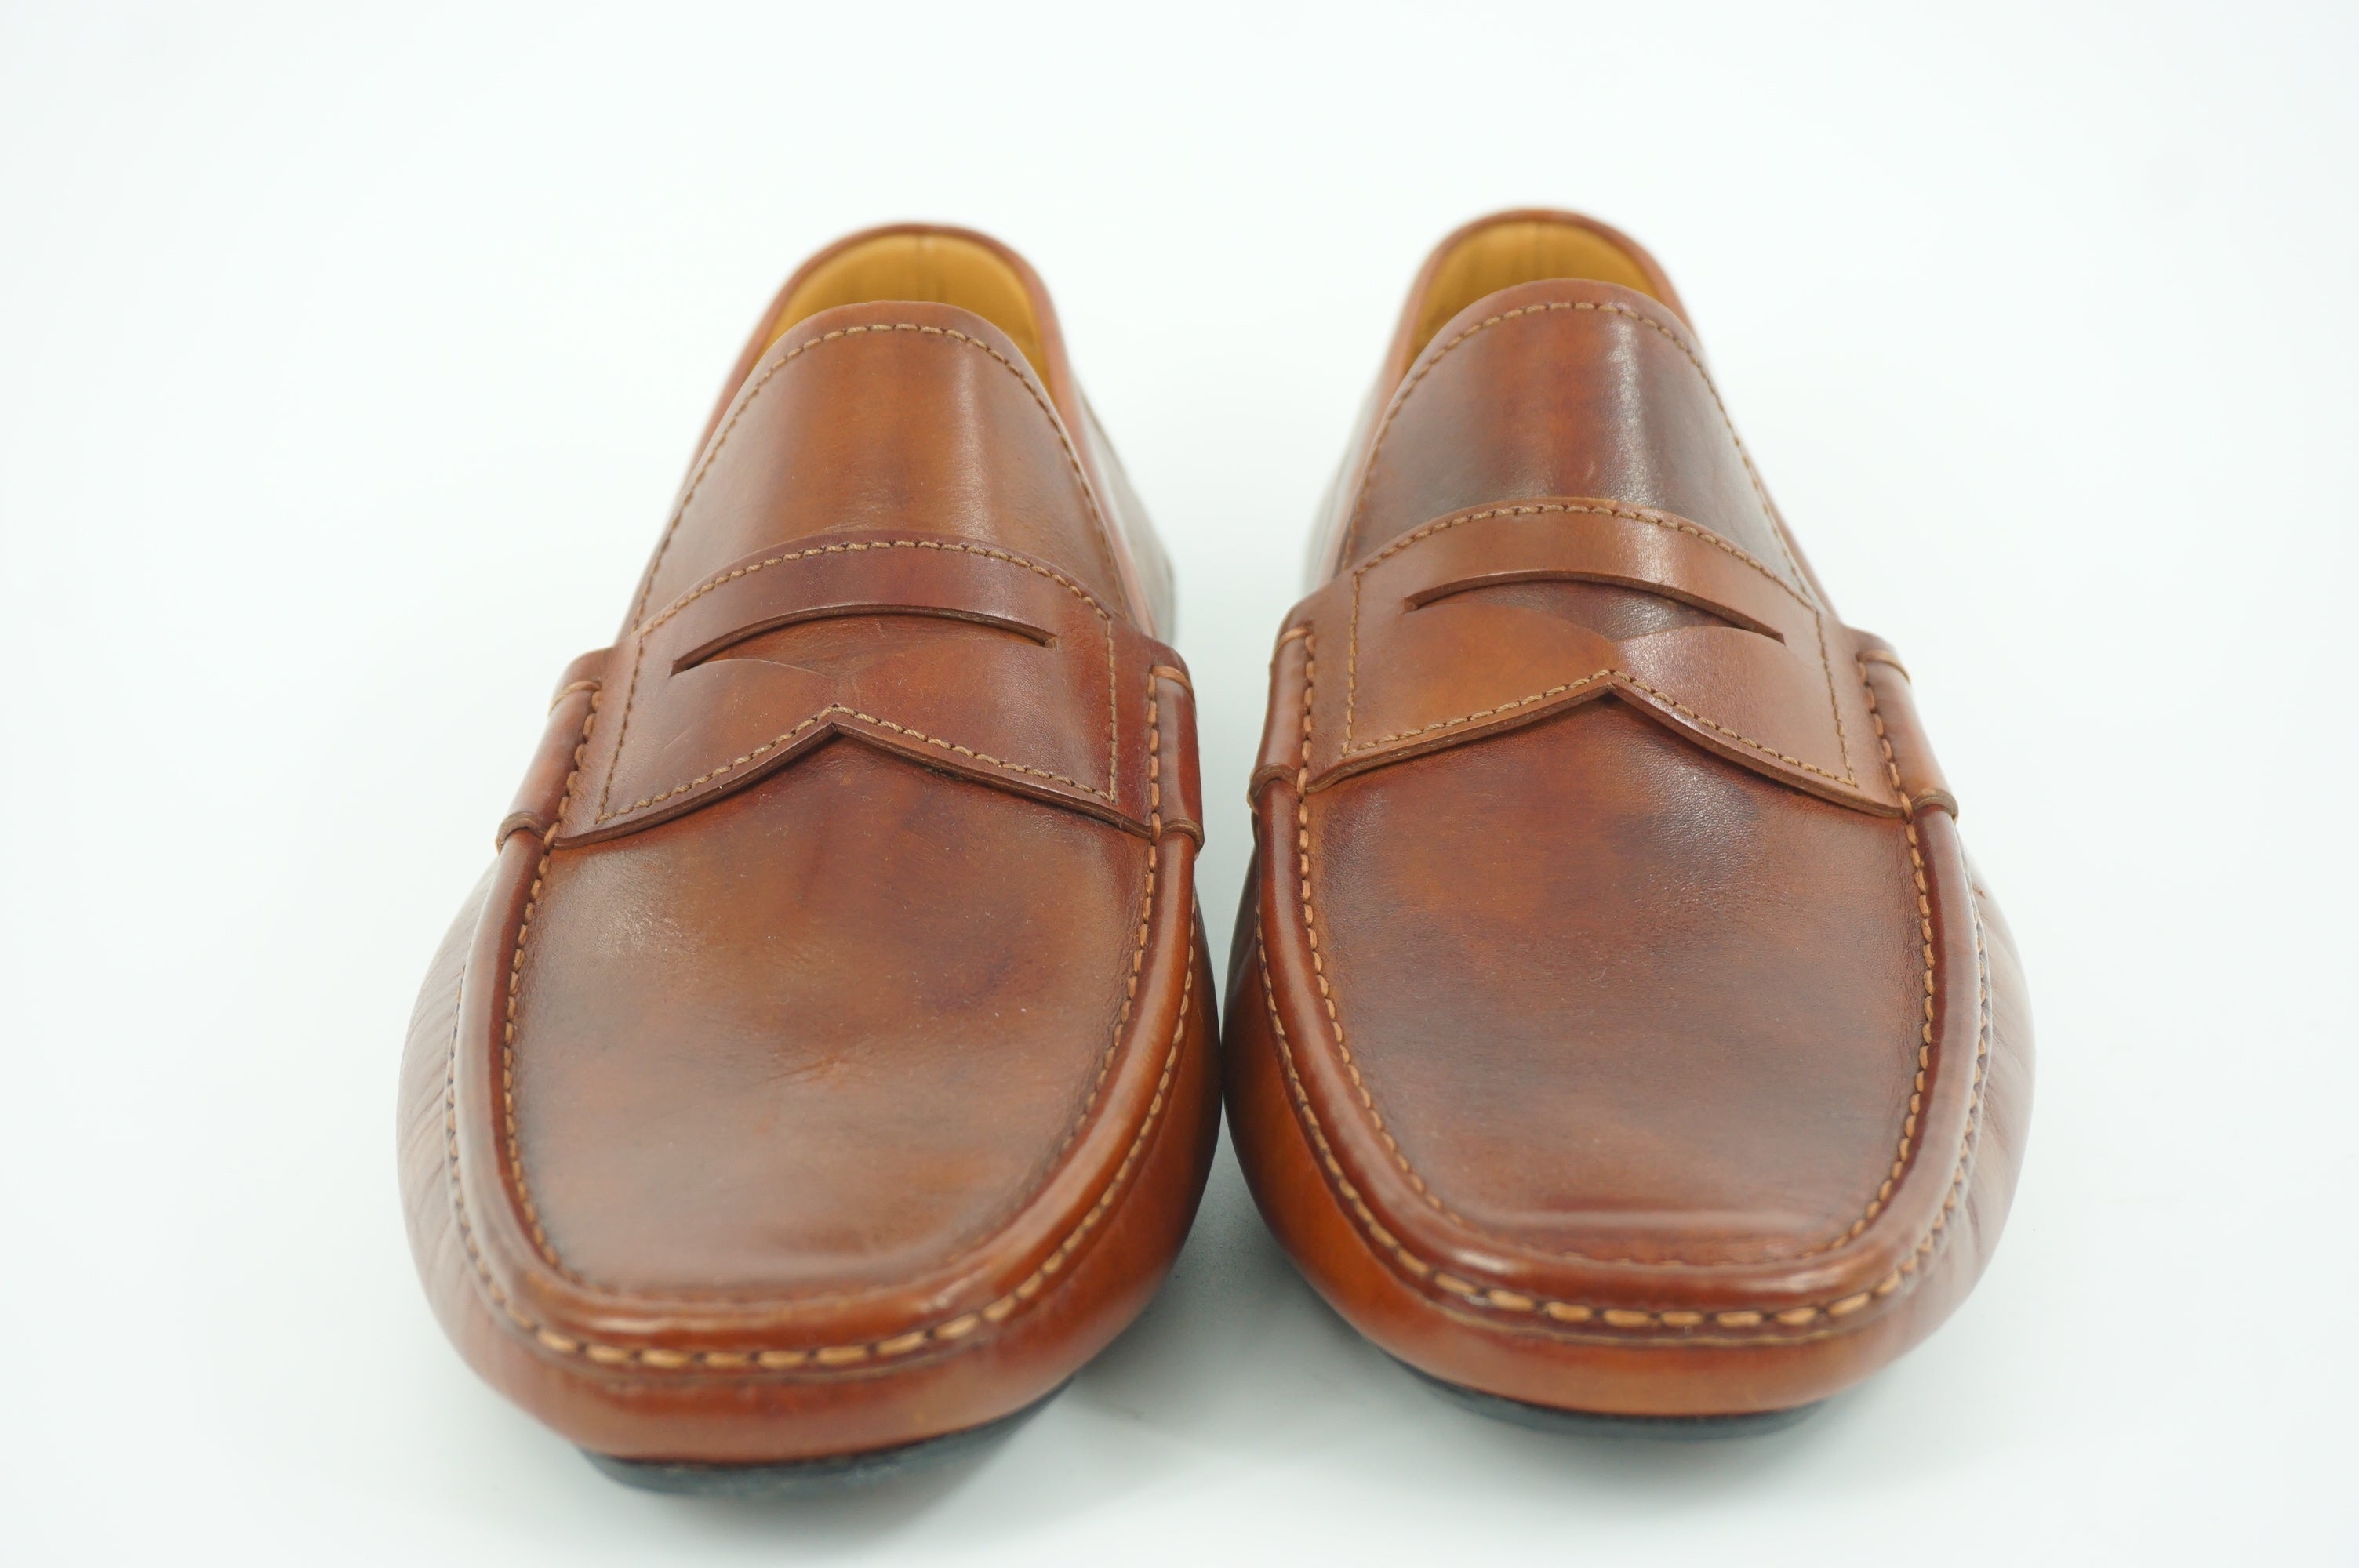 Magnanni Vance Penny Driving Loafers Size 9.5 Brown Leather $350 slip on NIB